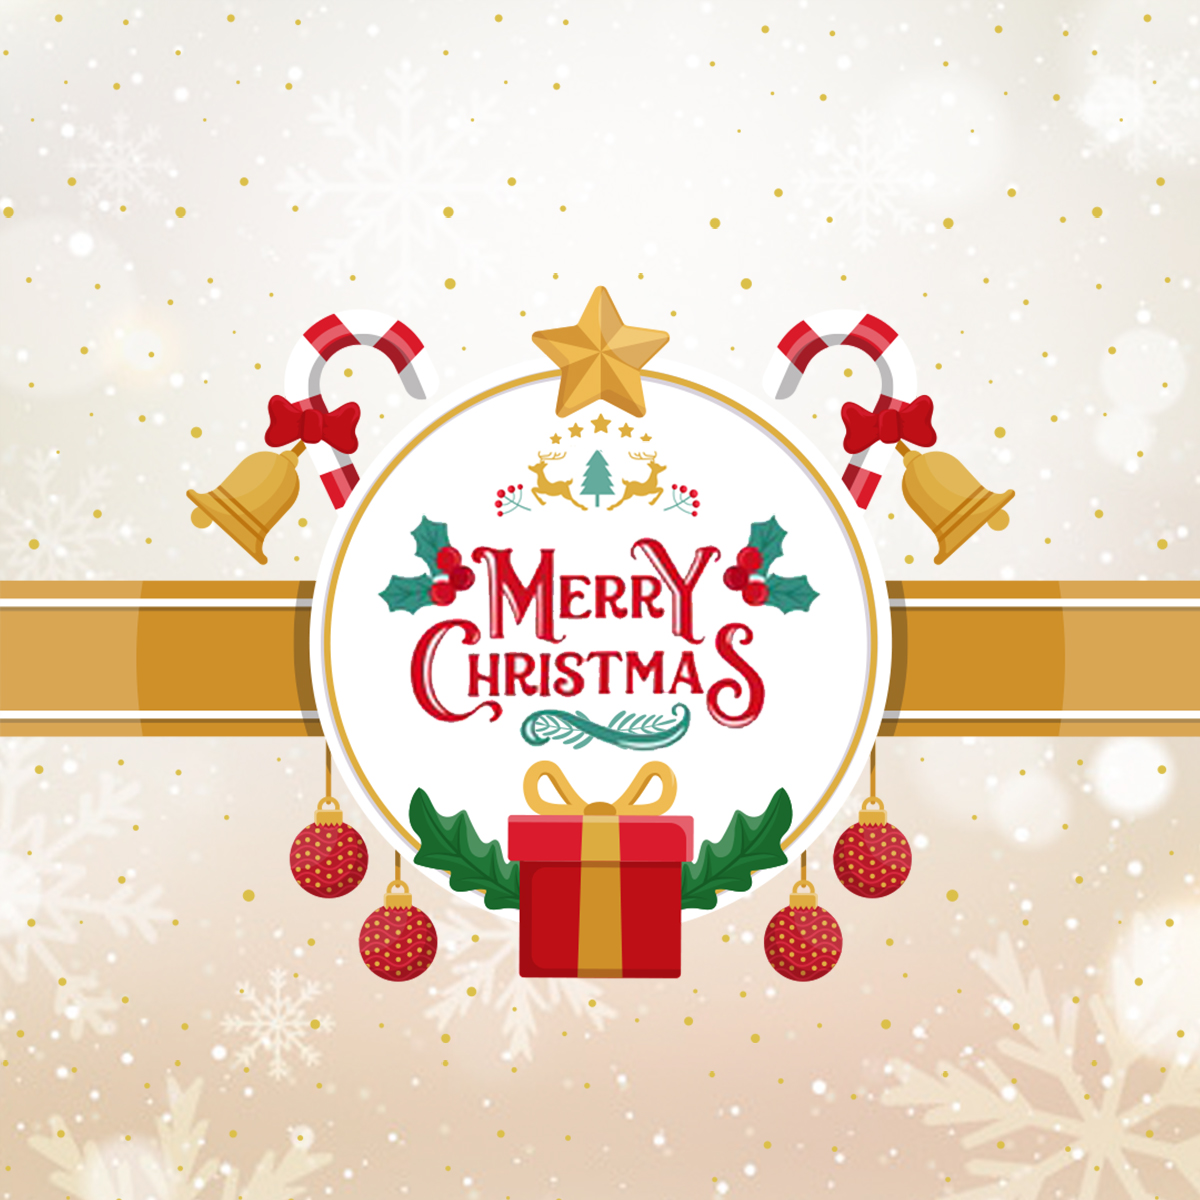 Download Merry Christmas Banner Background Free Psd | CorelDraw Design  (Download Free CDR, Vector, Stock Images, Tutorials, Tips & Tricks)